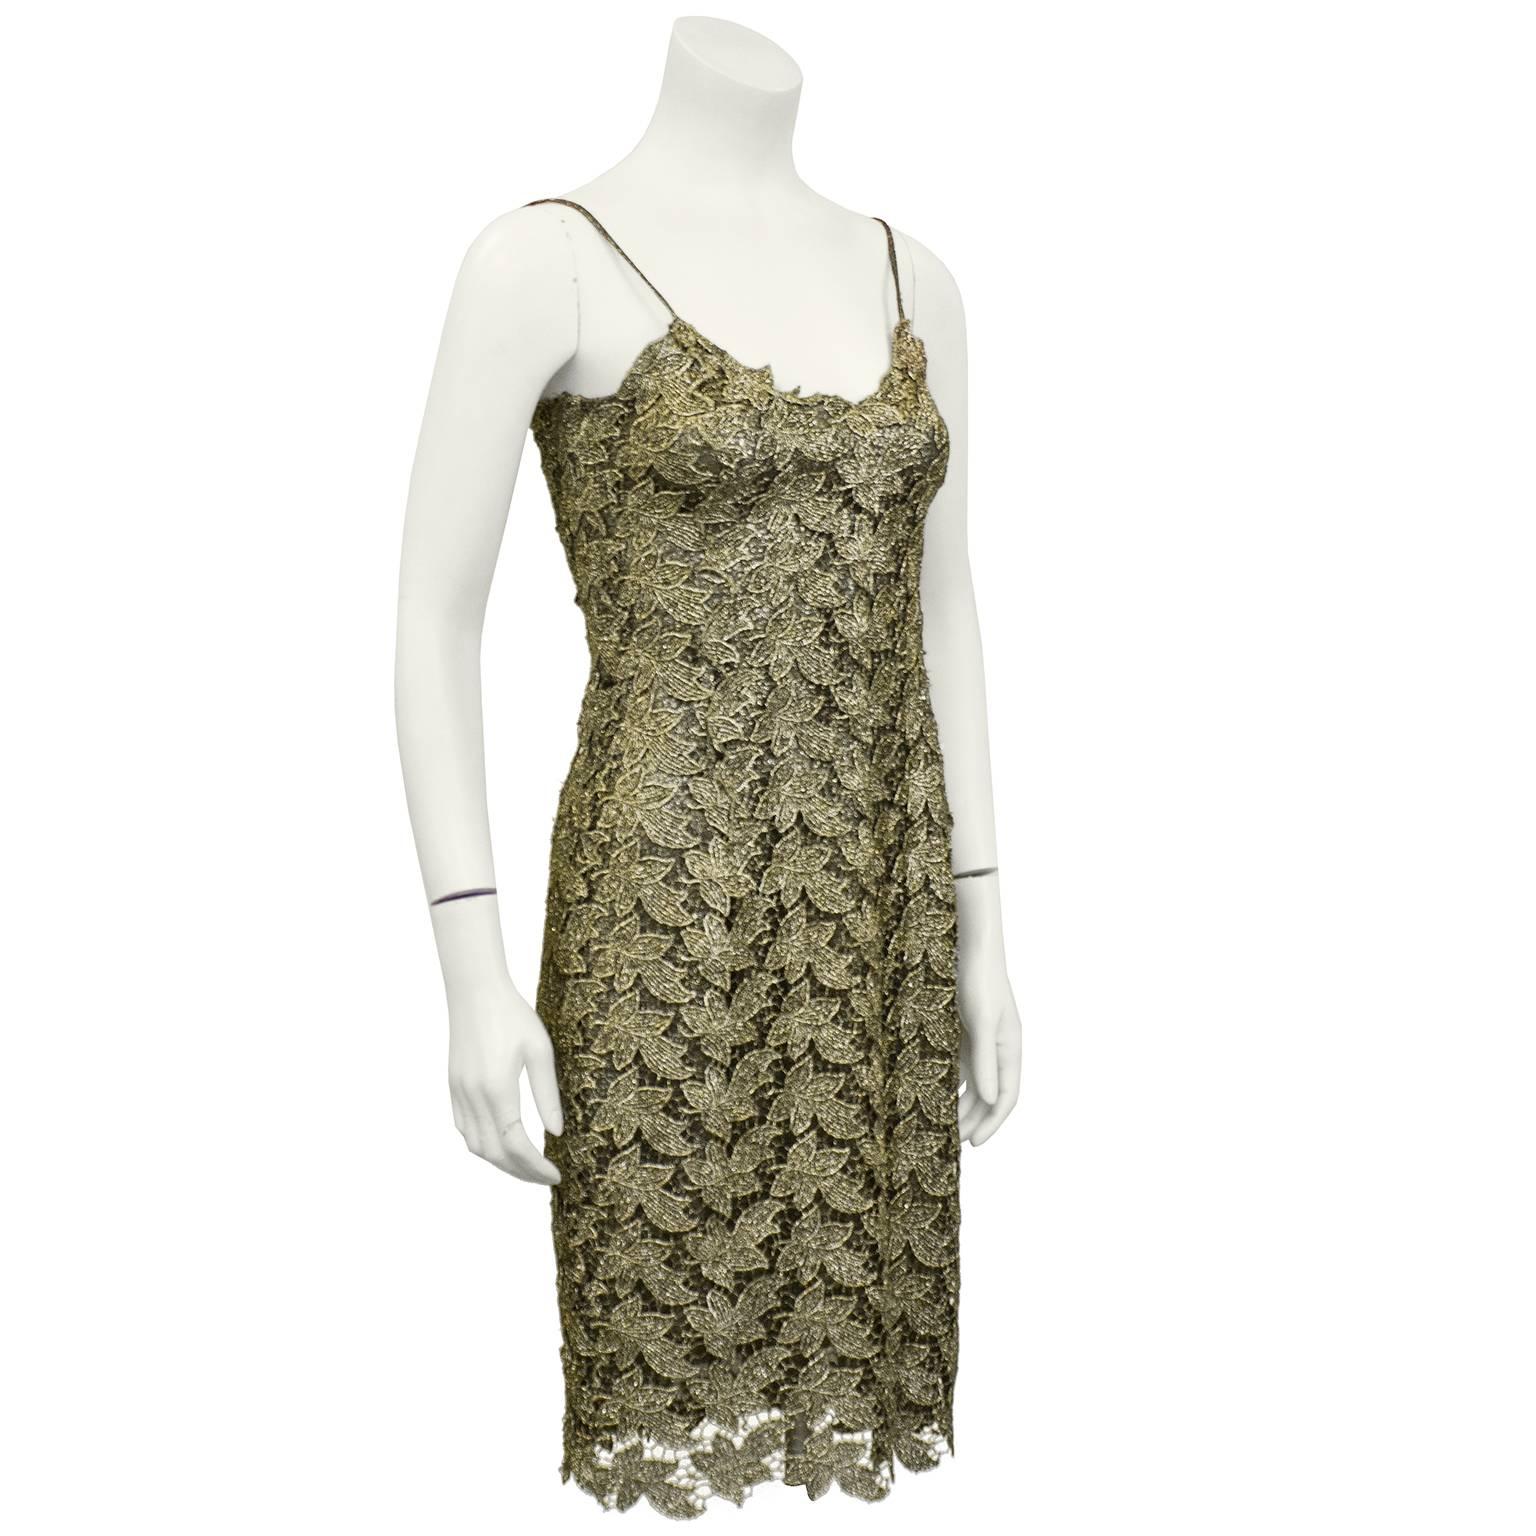 Amazing 1980s Gianni Versace gold lurex leaf motif lace slip dress with black underlay. Spaghetti straps and slight v neck. Zipper closure at centre back. Gold lurex hits the light beautifully. IT 42, fits like a US 4. Excellent vintage